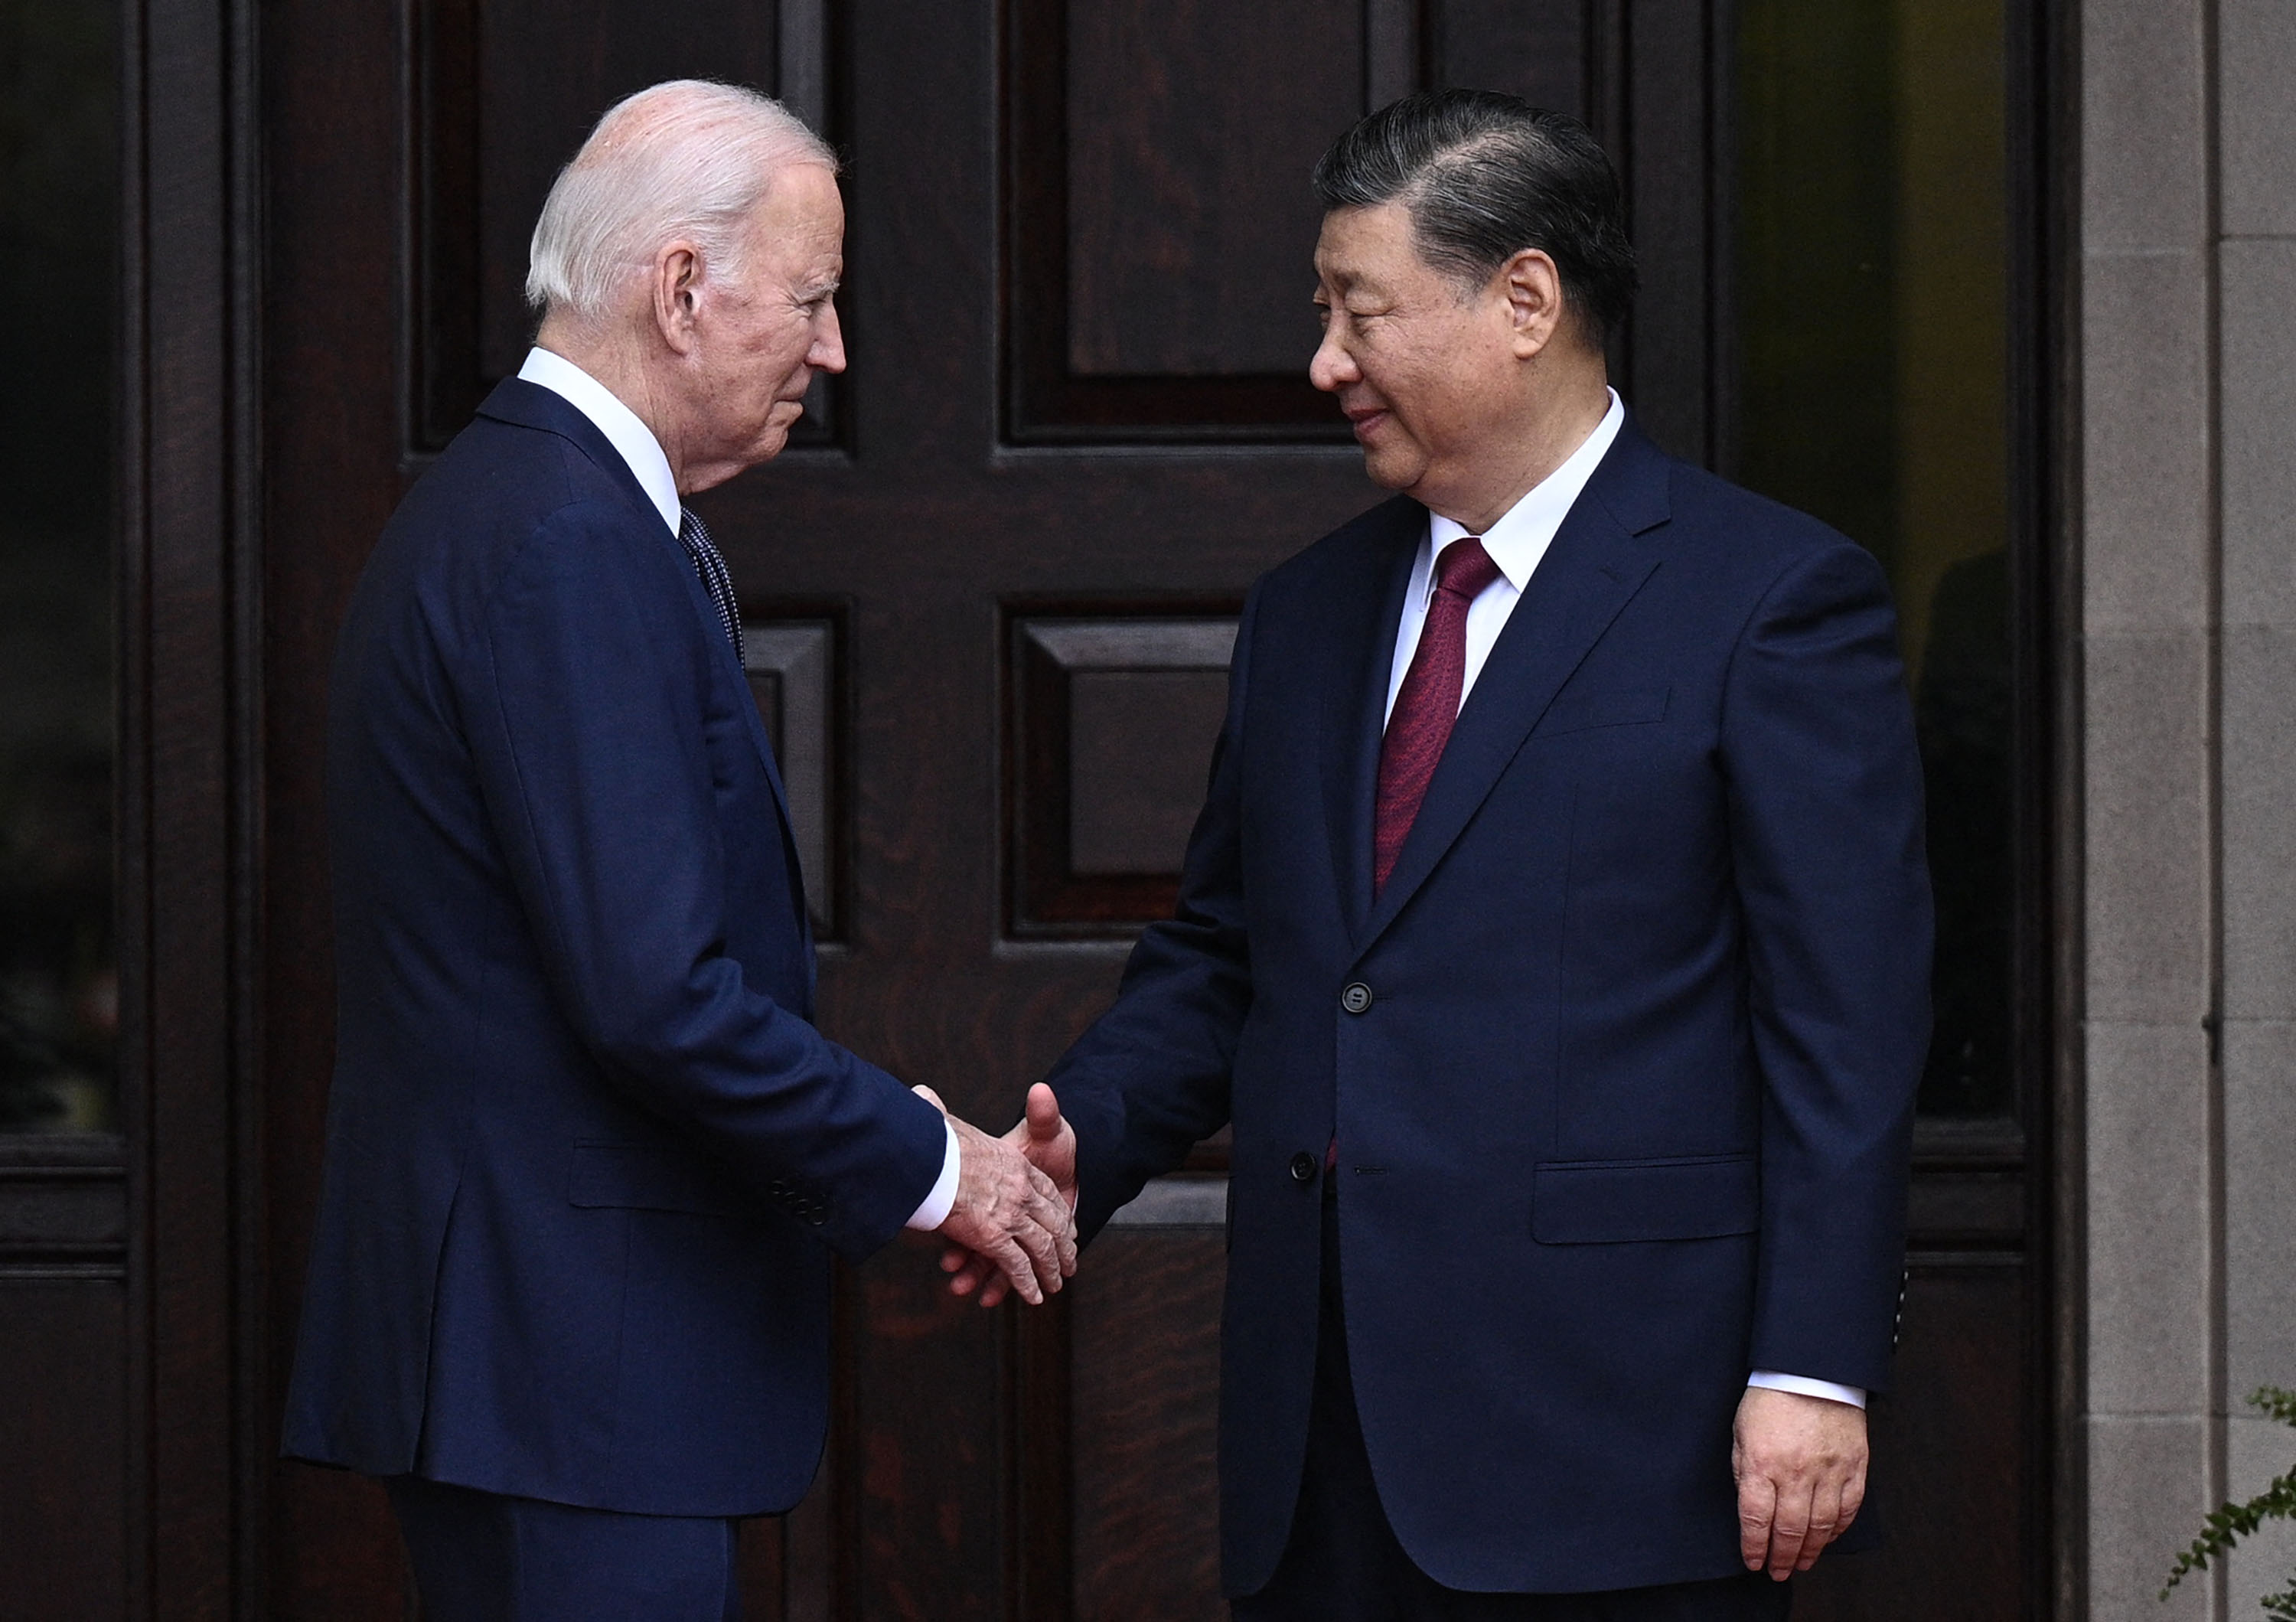 President Joe Biden, left, and Chinese leader Xi Jinping, right, shake hands while standing in front of a dark, paneled wood door.